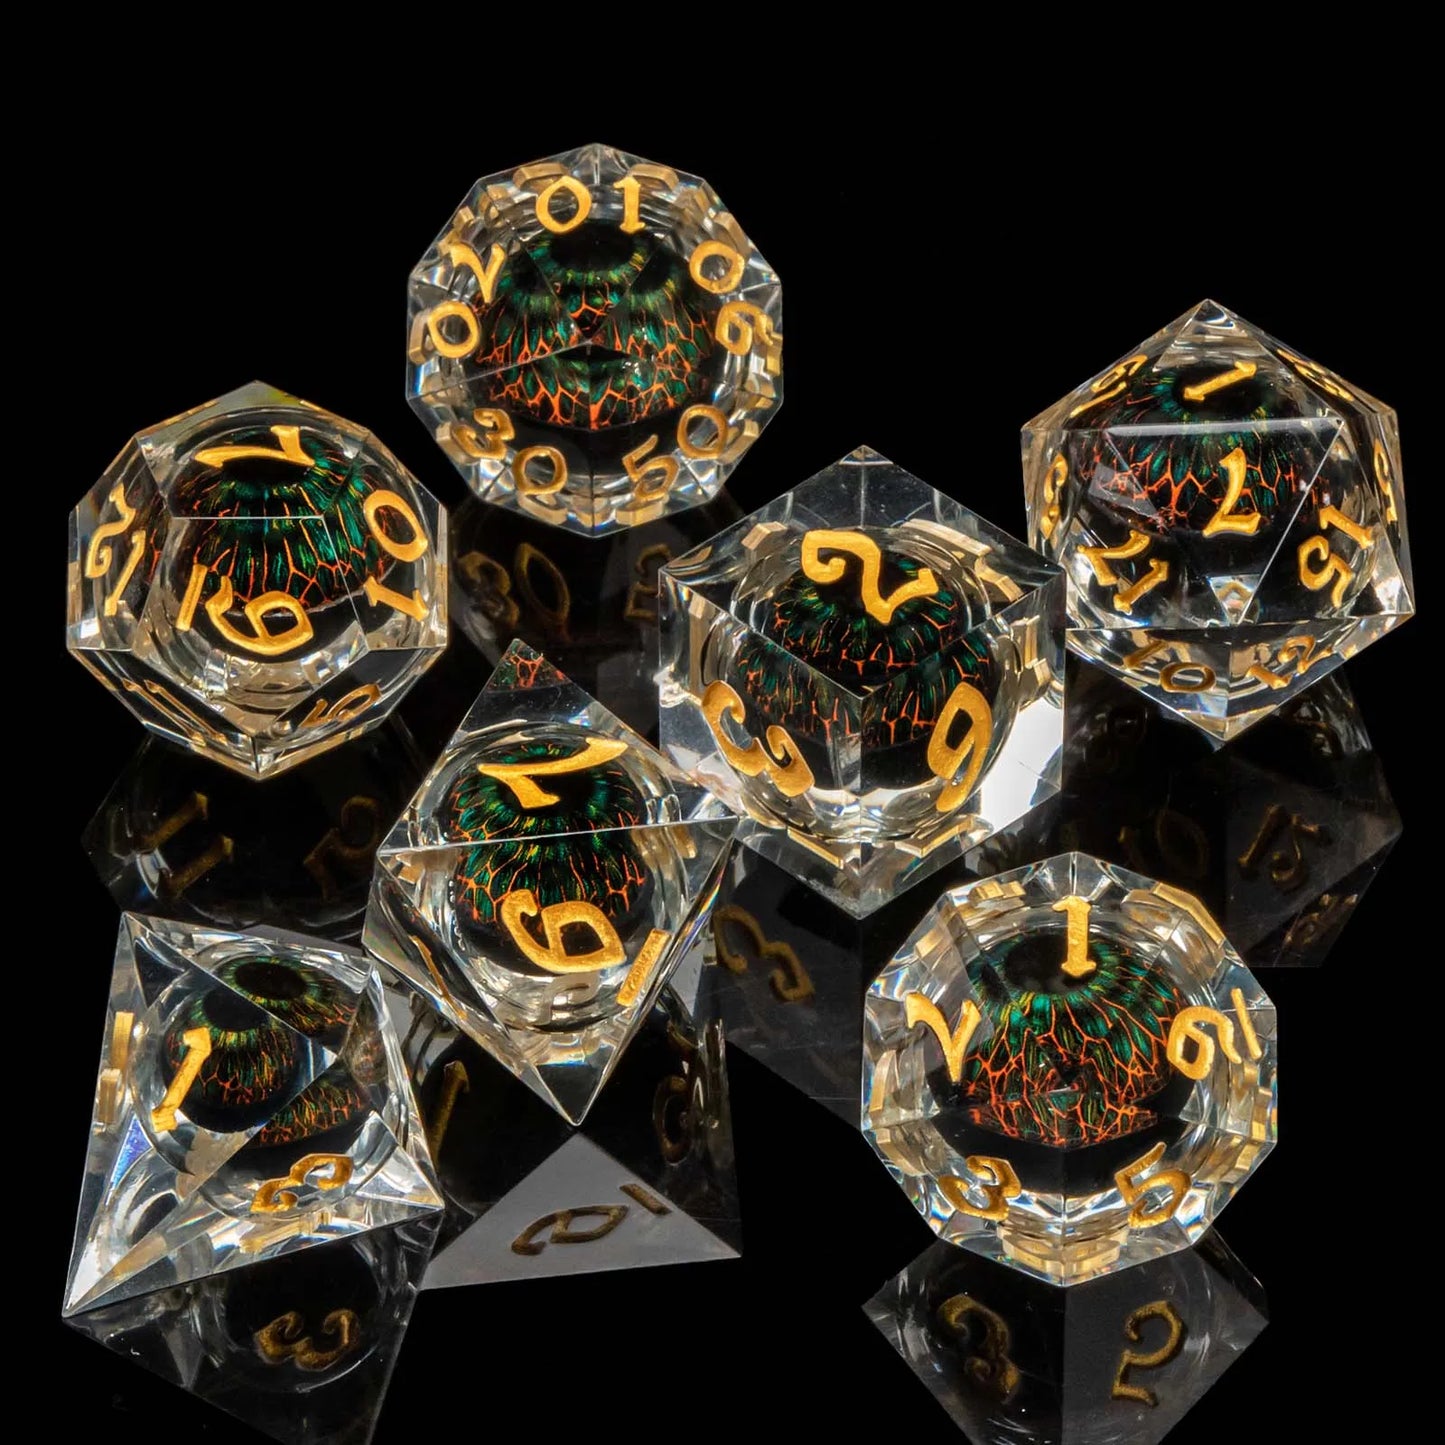 DND Eye Liquid Flow Core Resin D&D Dice Set For D and D Dungeon and Dragon Pathfinder Table Role Playing Game Polyhedral Dice AZ15